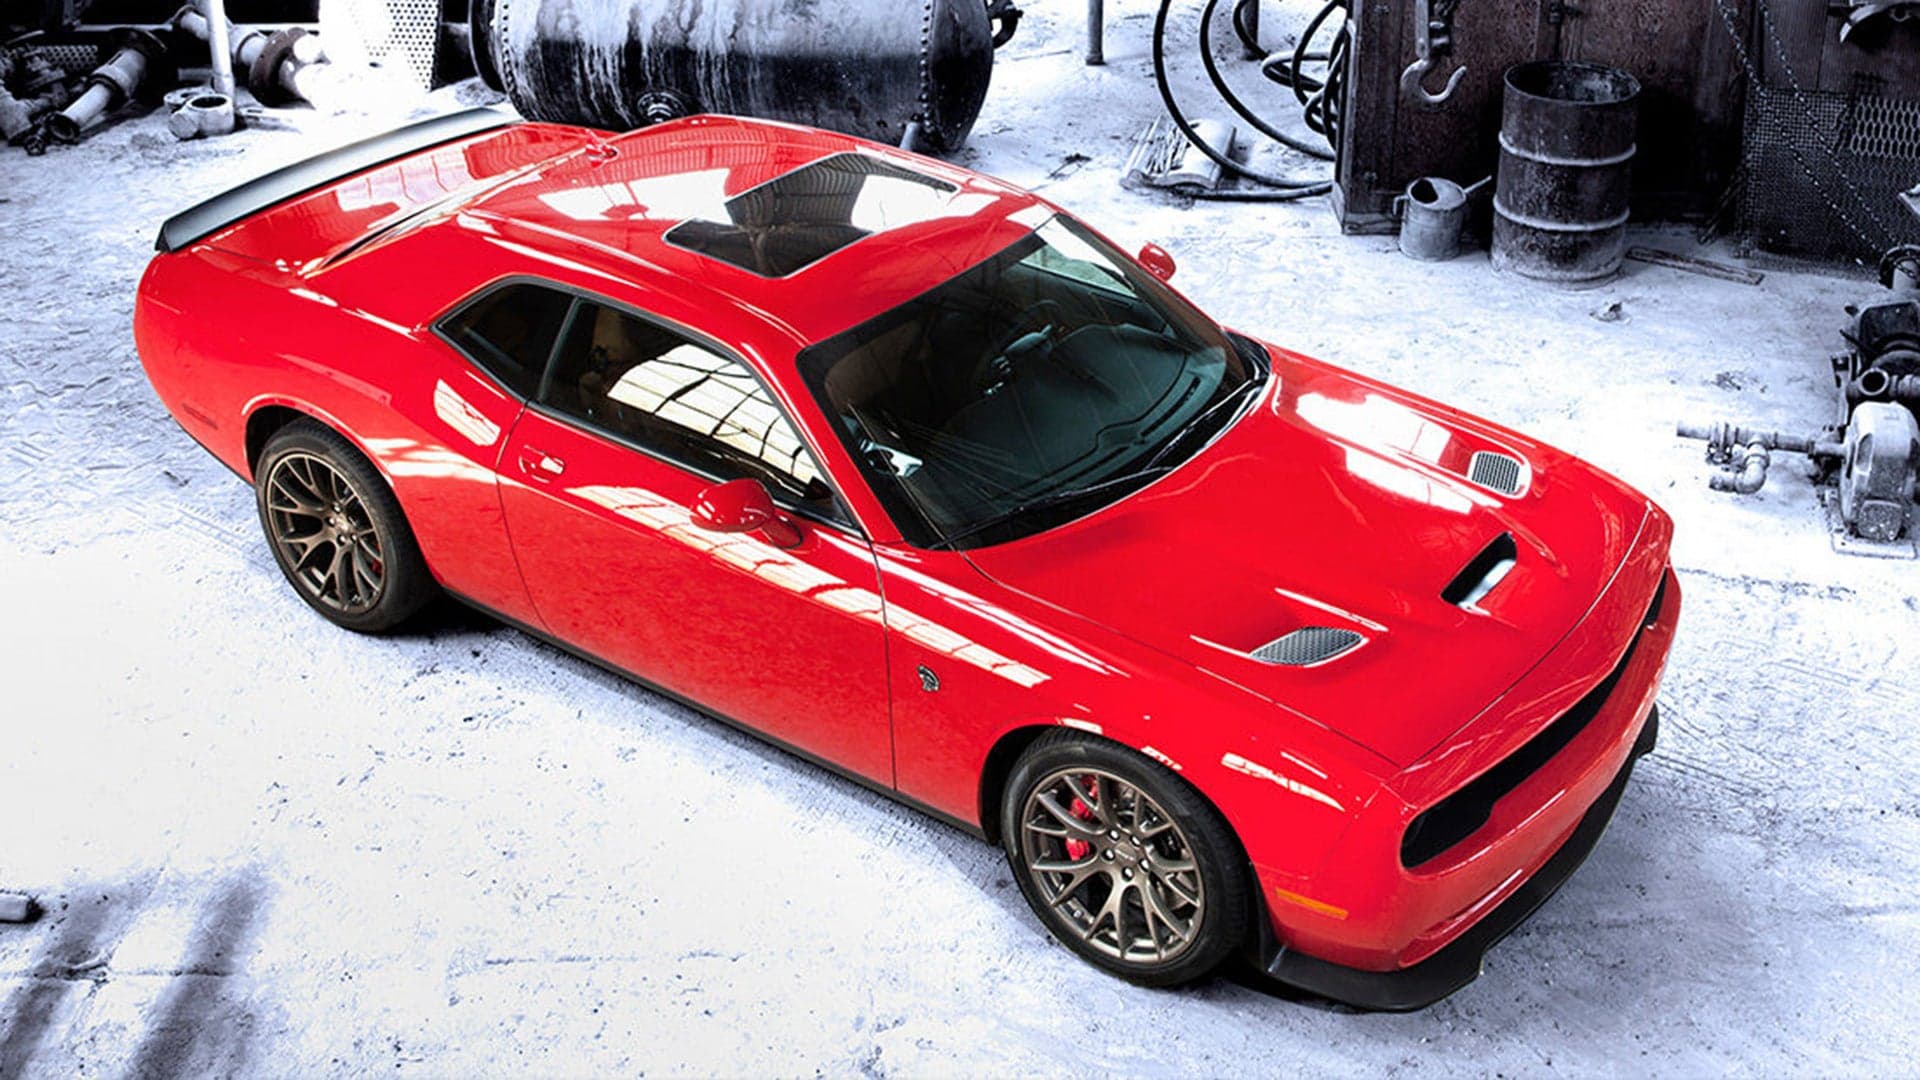 New Dodge Challenger Hellcat Owner Almost Immediately Ends Up in Jail